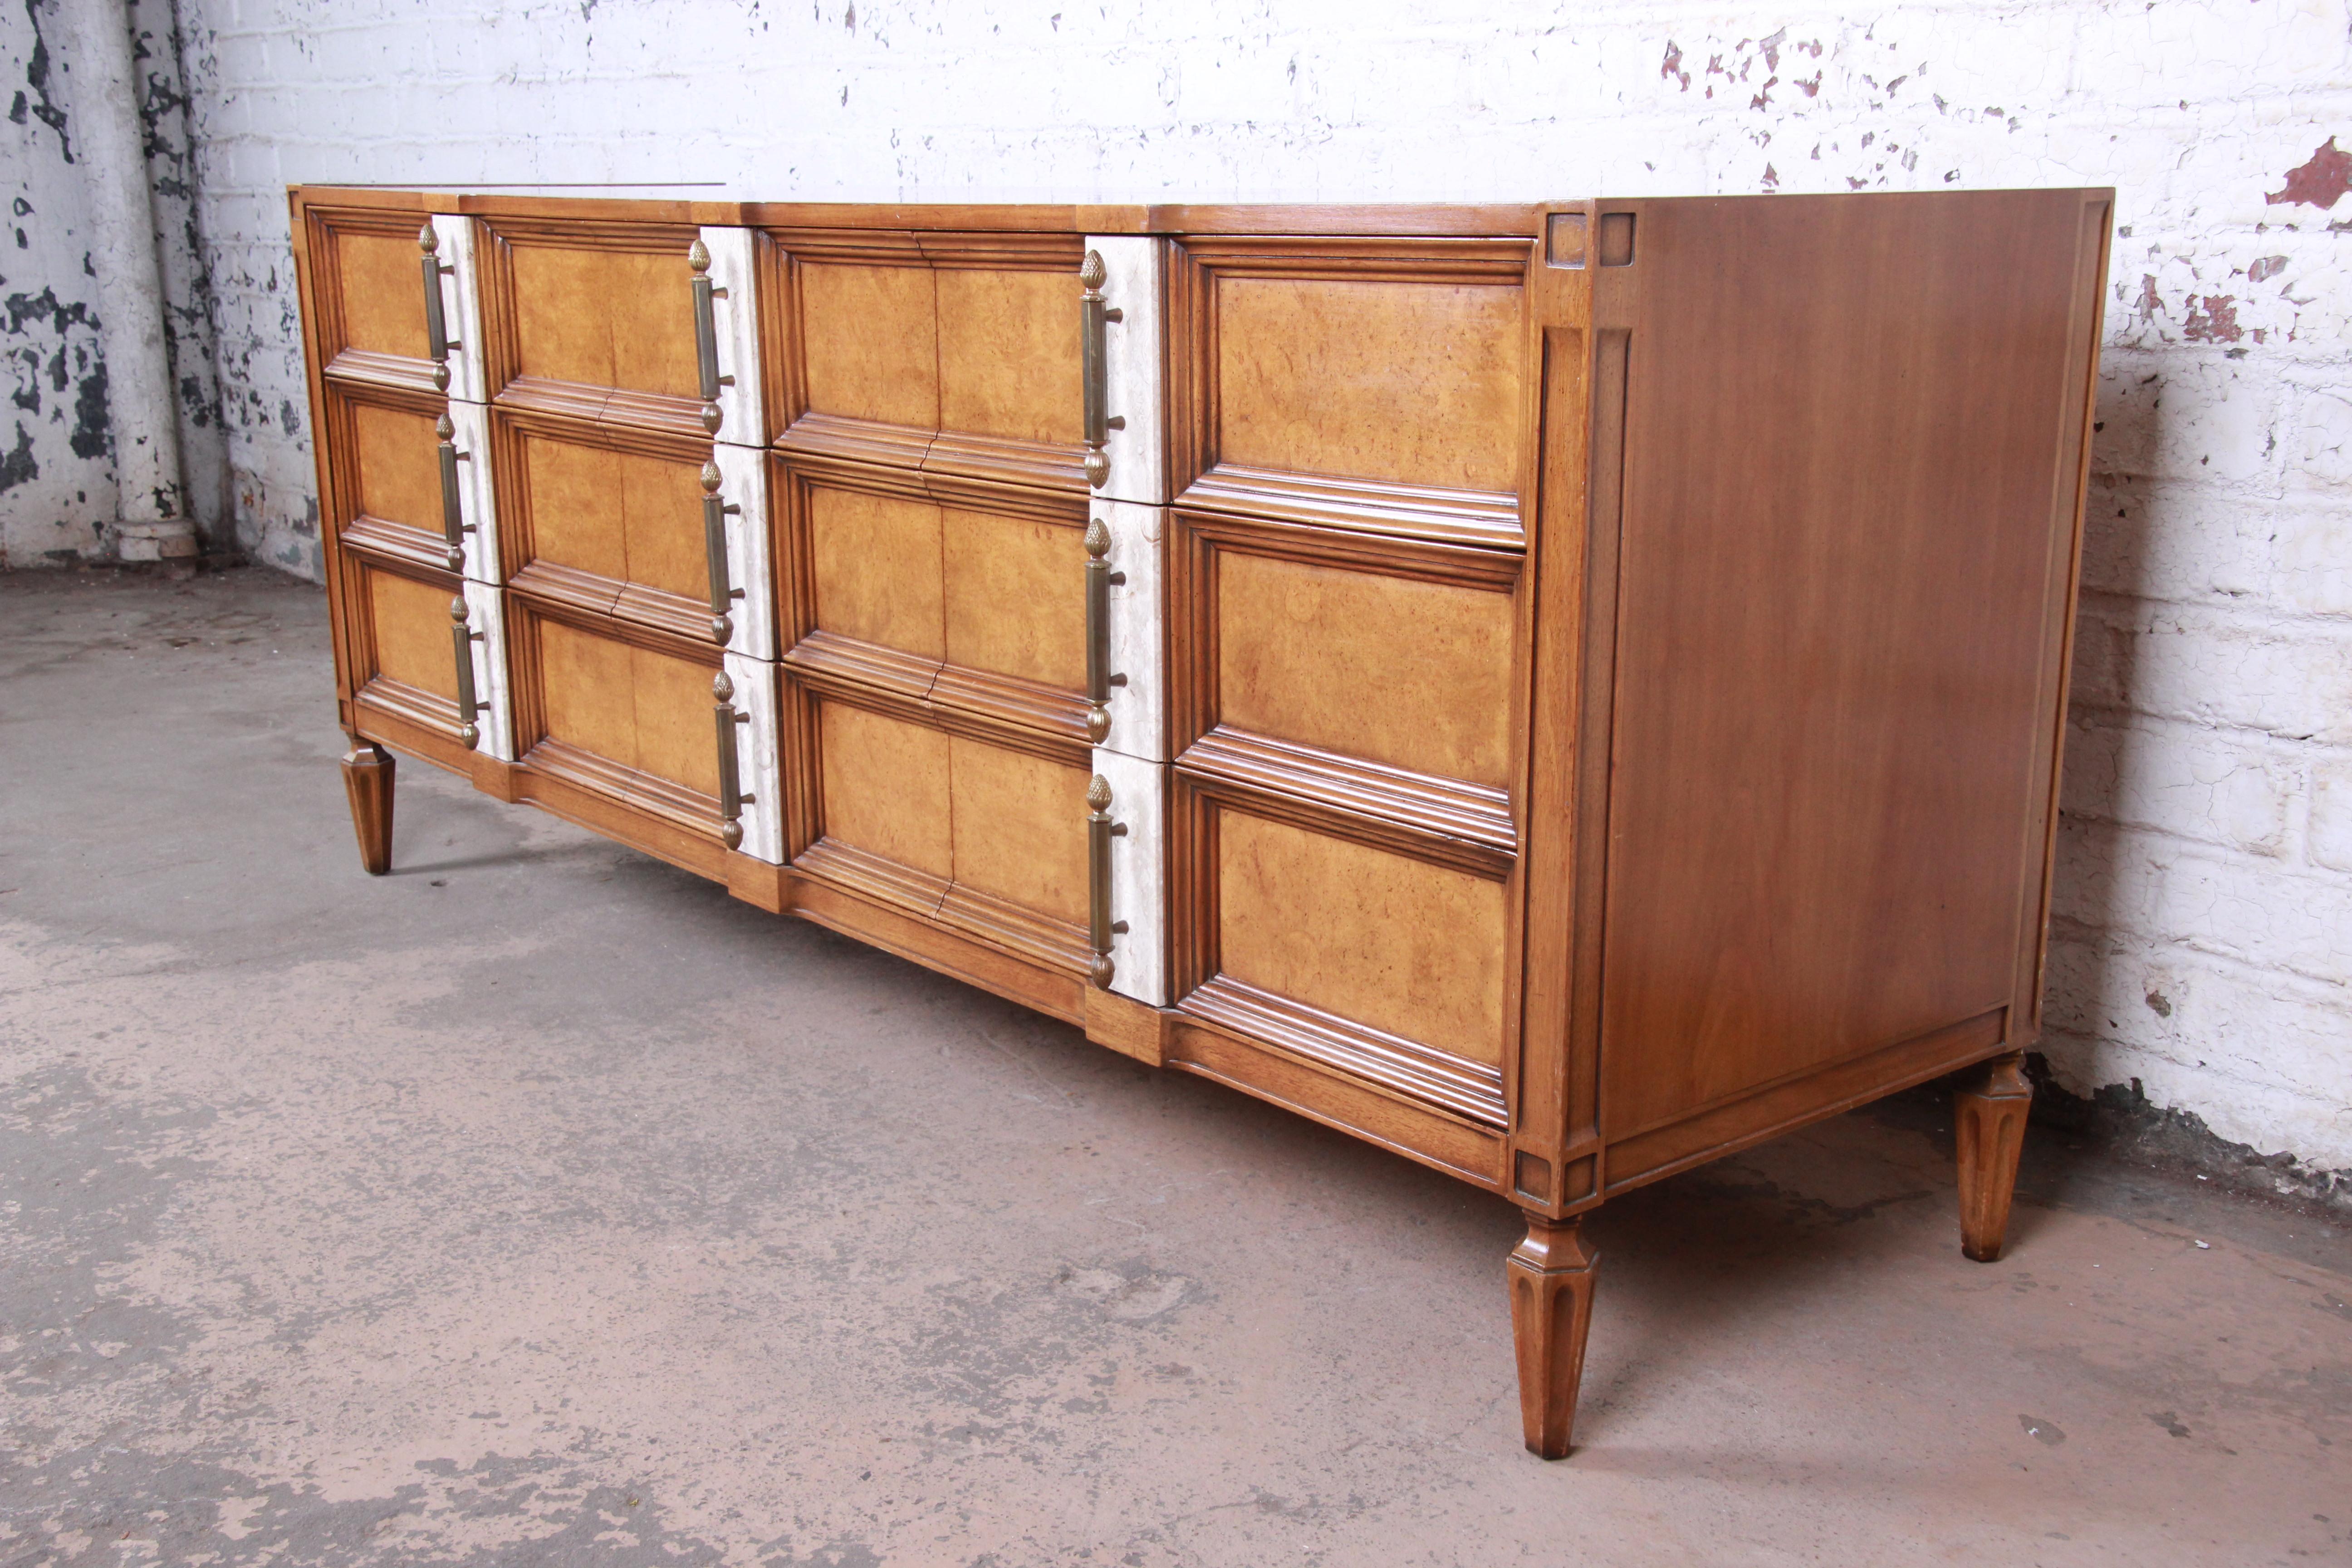 A gorgeous Mid-Century Modern Hollywood Regency triple dresser or credenza from the 